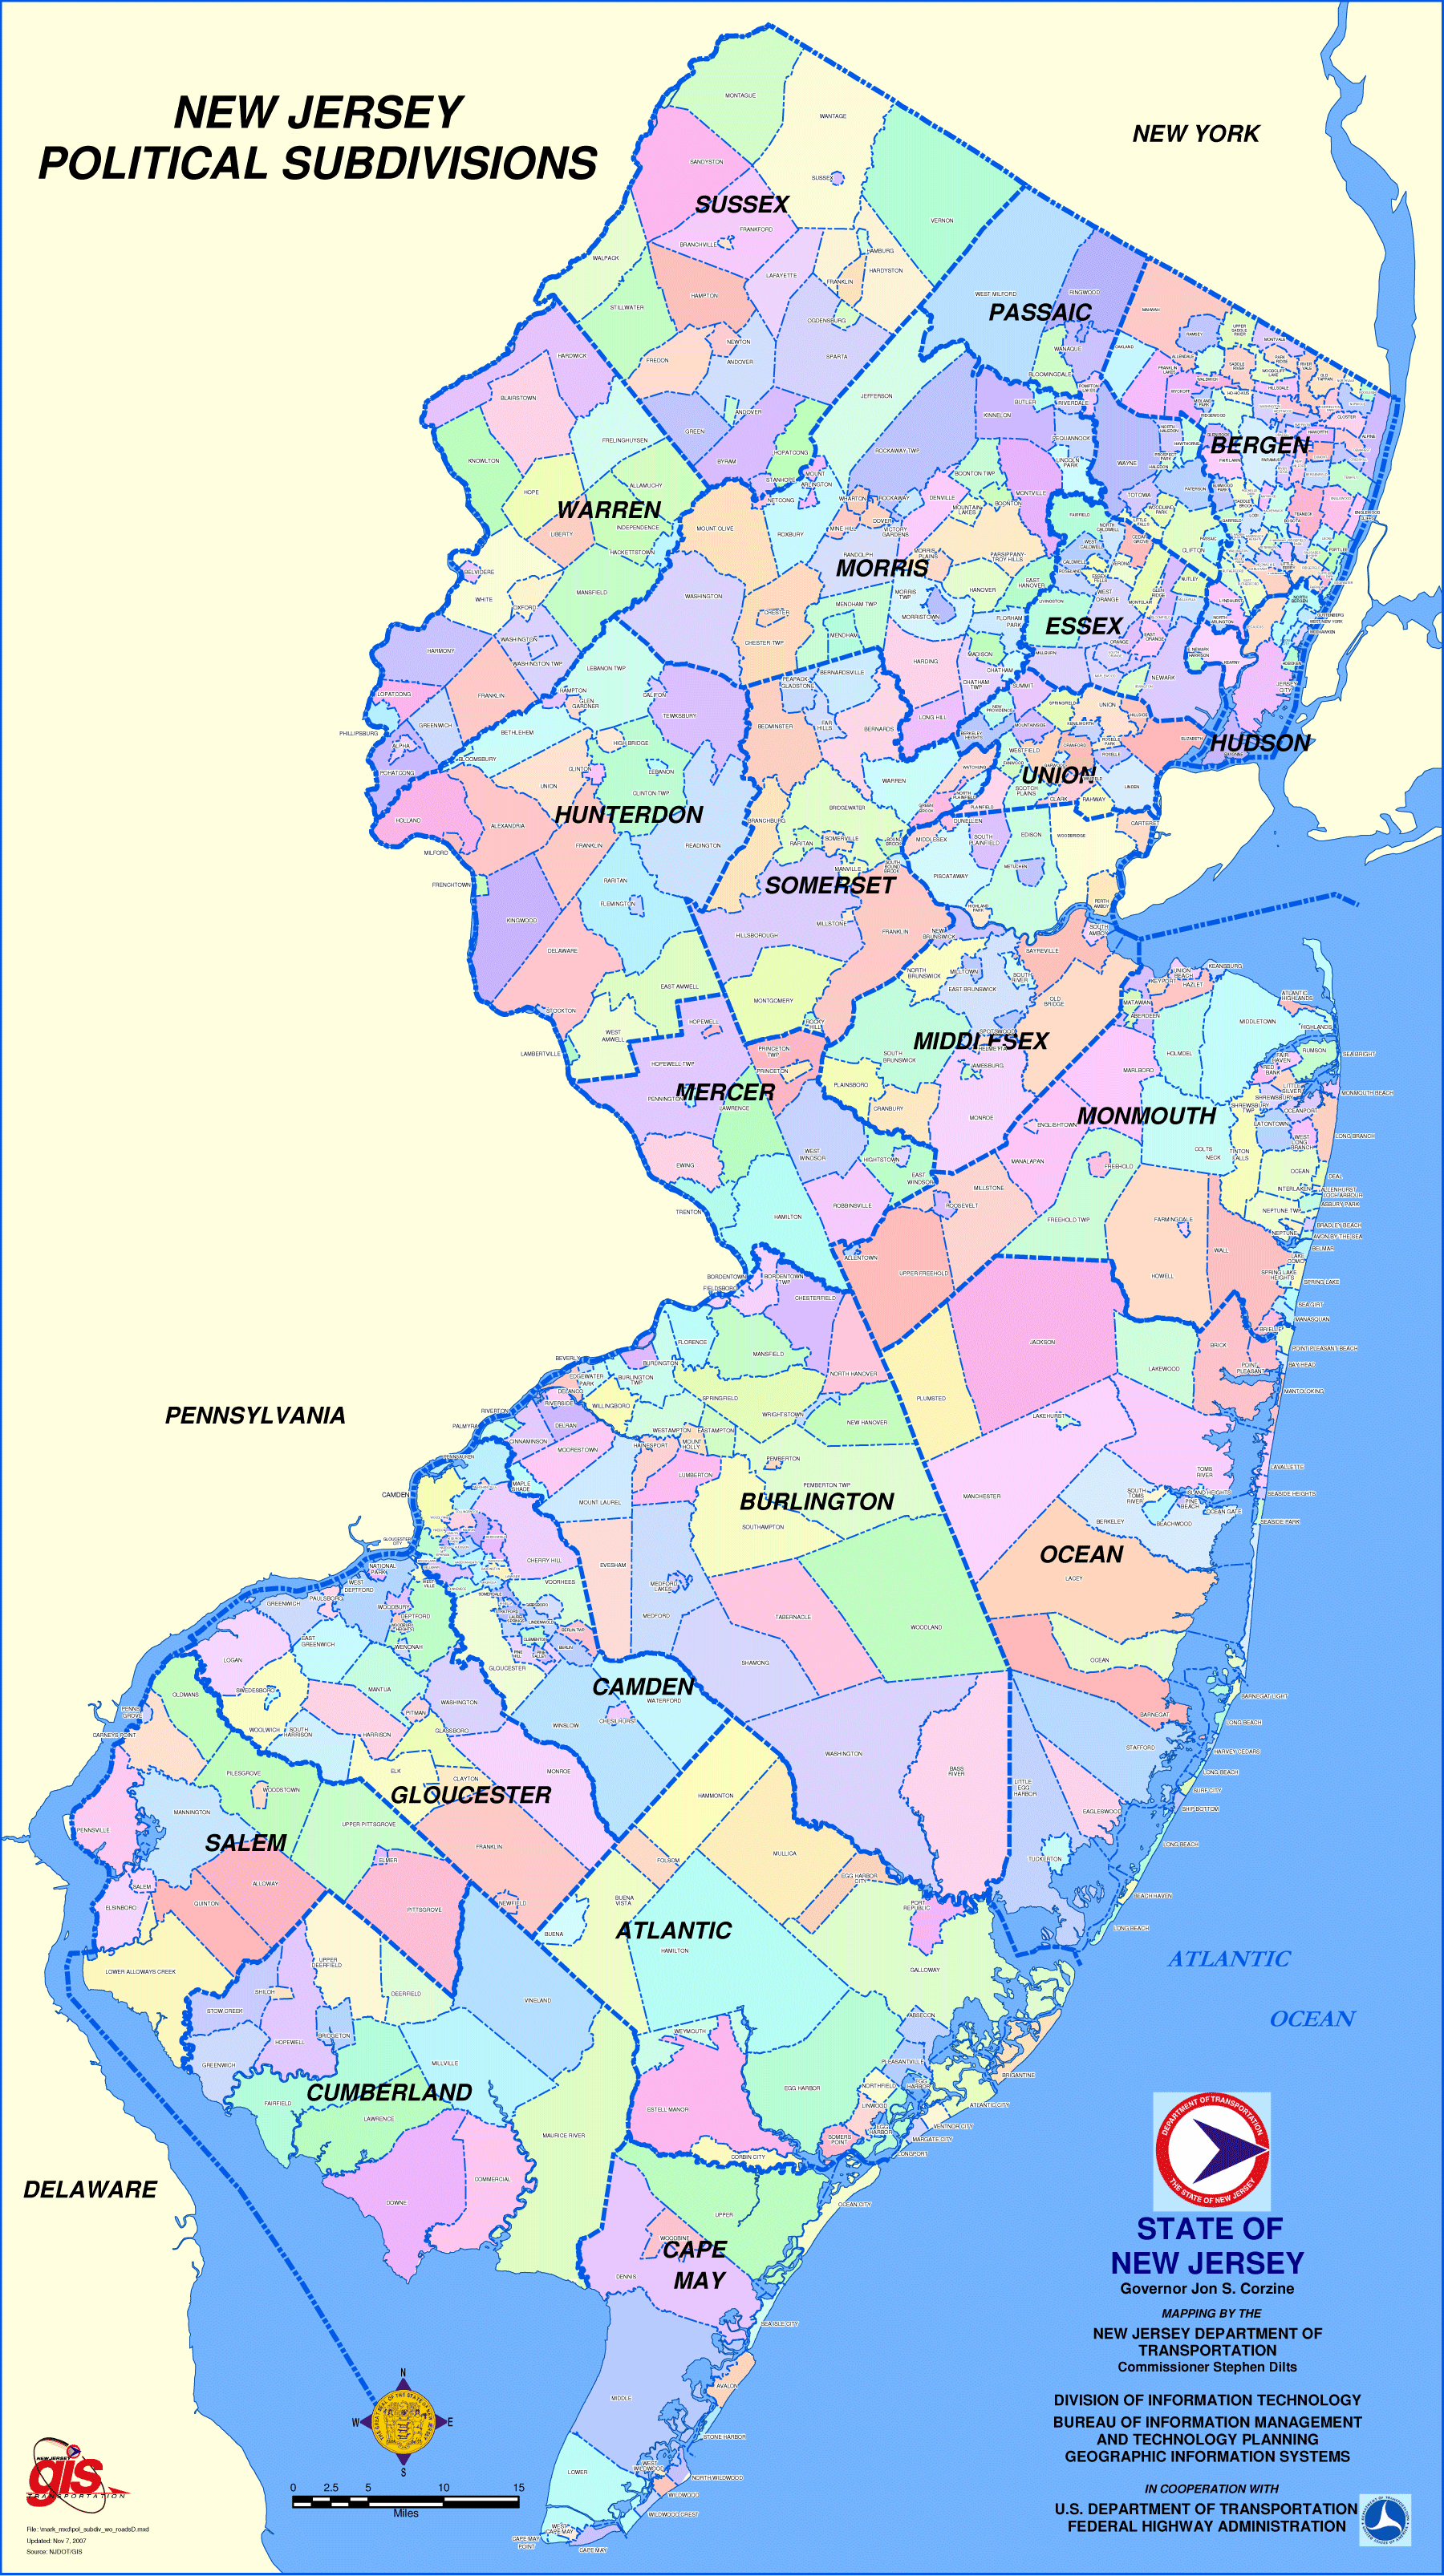 Large Map Of New Jersey State Political Subdivisions New Jersey State Usa Maps Of The Usa Maps Collection Of The United States Of America